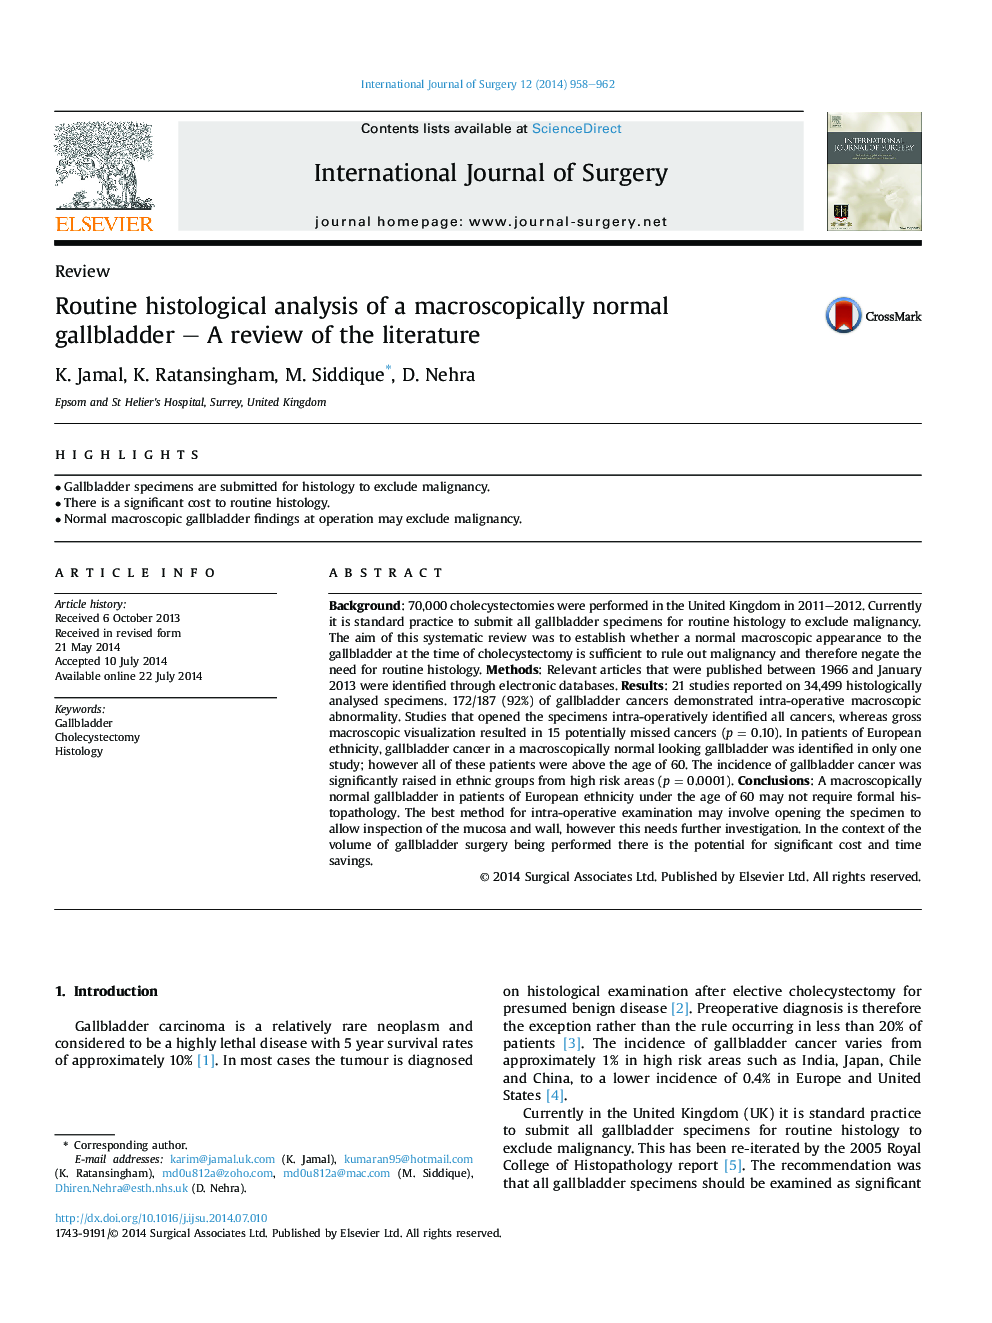 ReviewRoutine histological analysis of a macroscopically normal gallbladder - A review of the literature